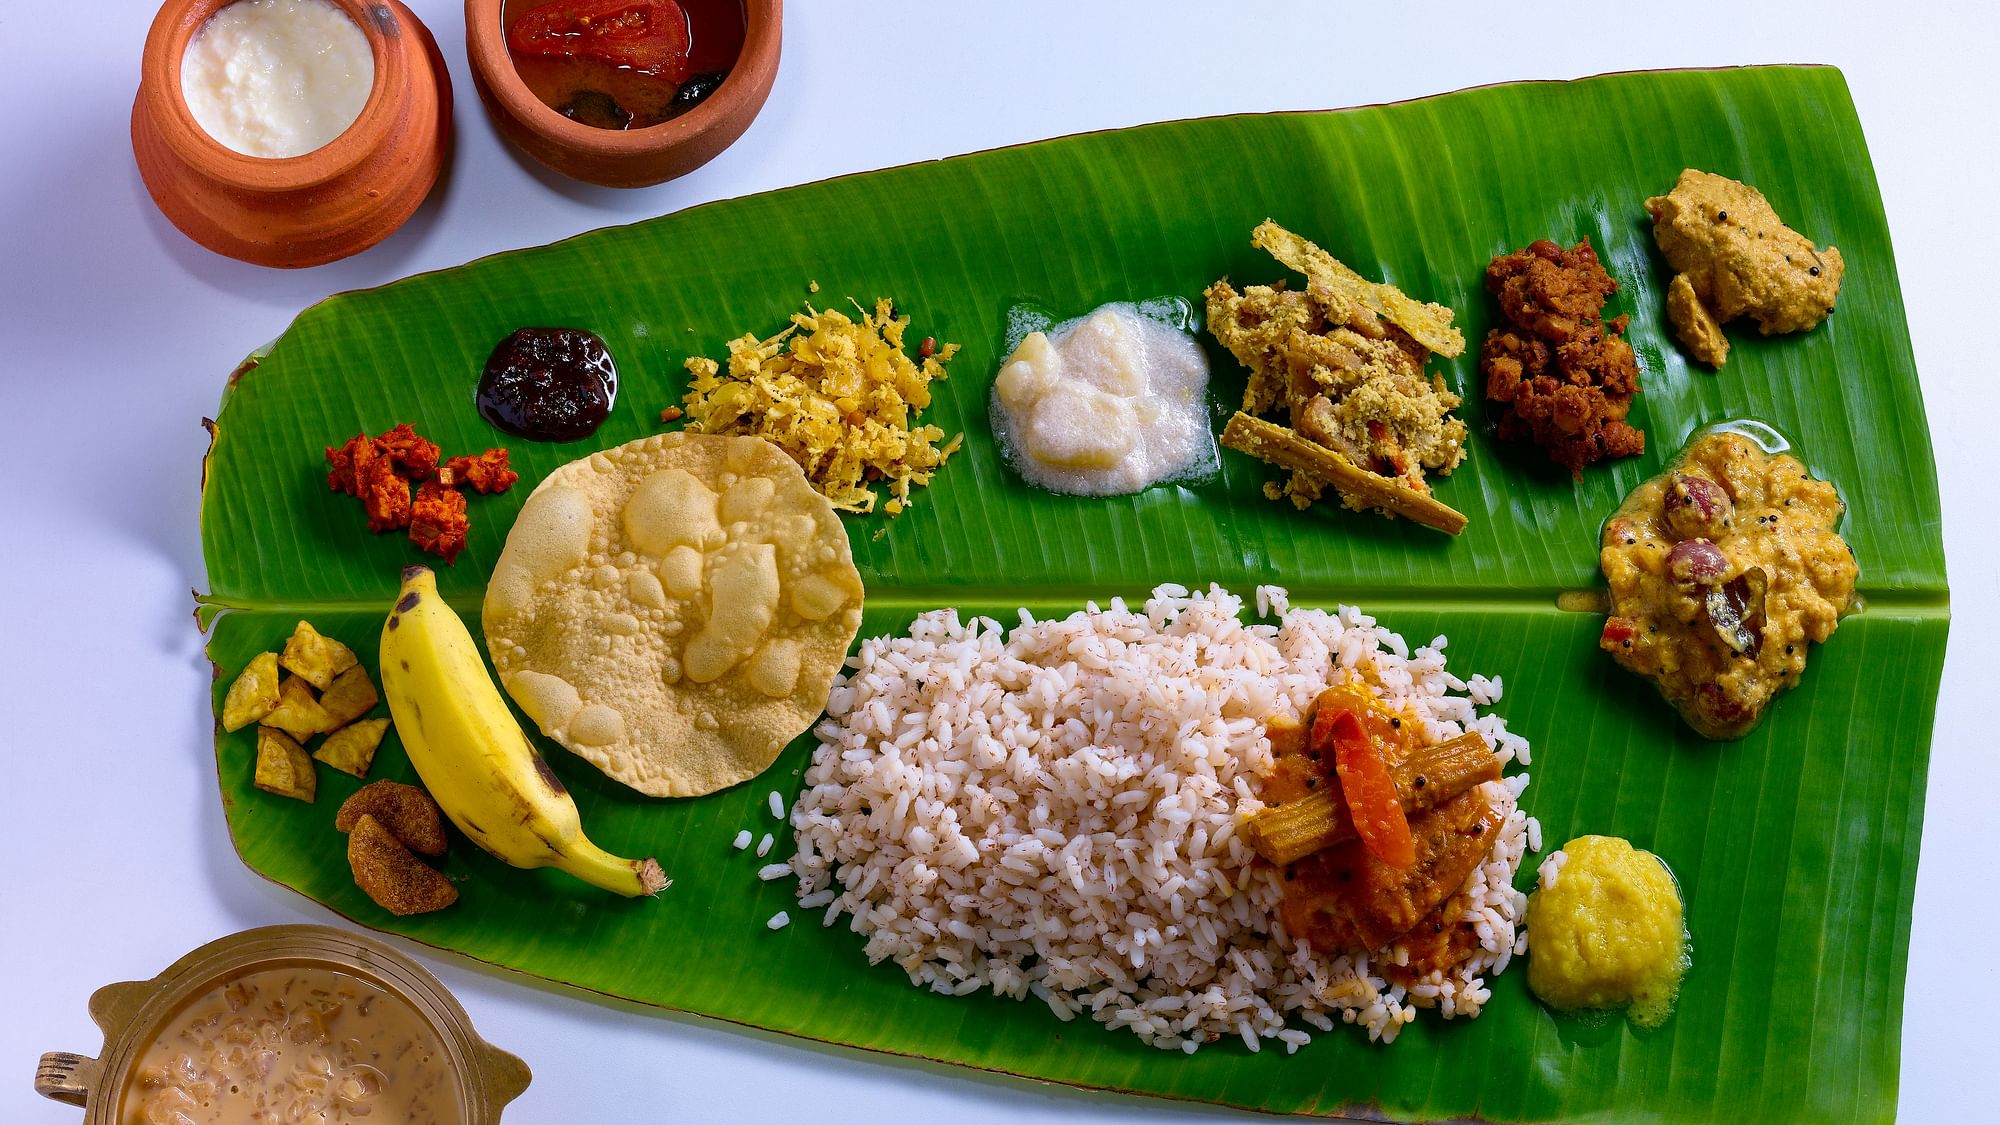 Happy Vishu! The ingredients that make the Sadhya are seasonal &amp; hence at the peak of their nutritional content.